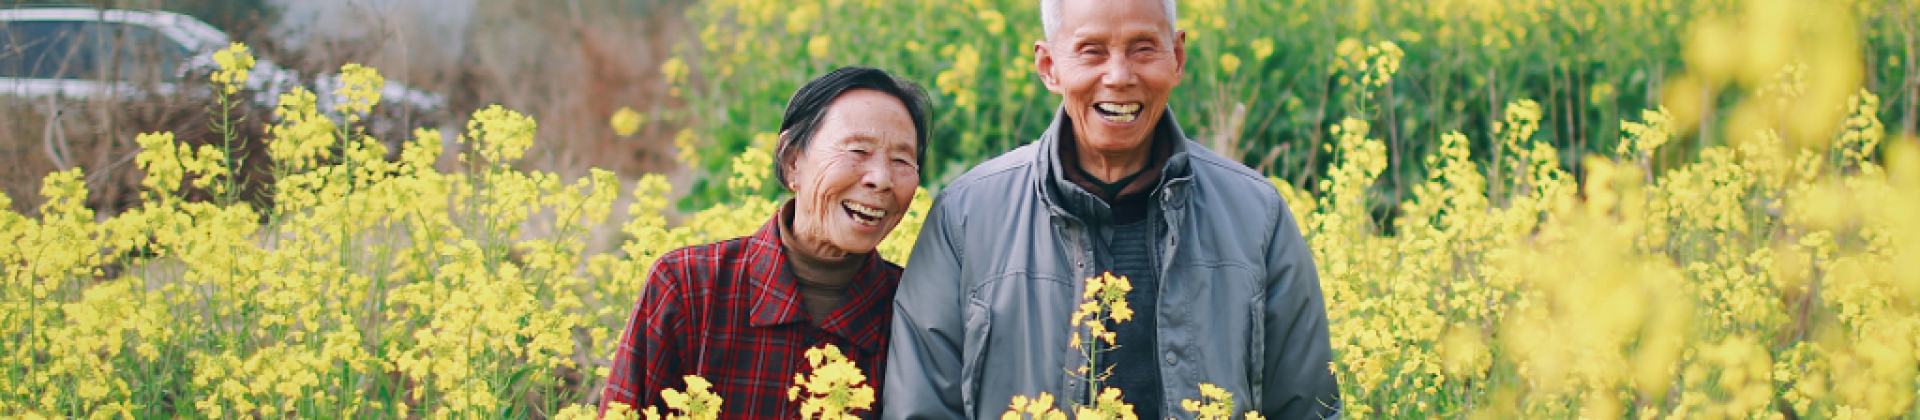 couple smiling together in field, Mental Health During the Holidays